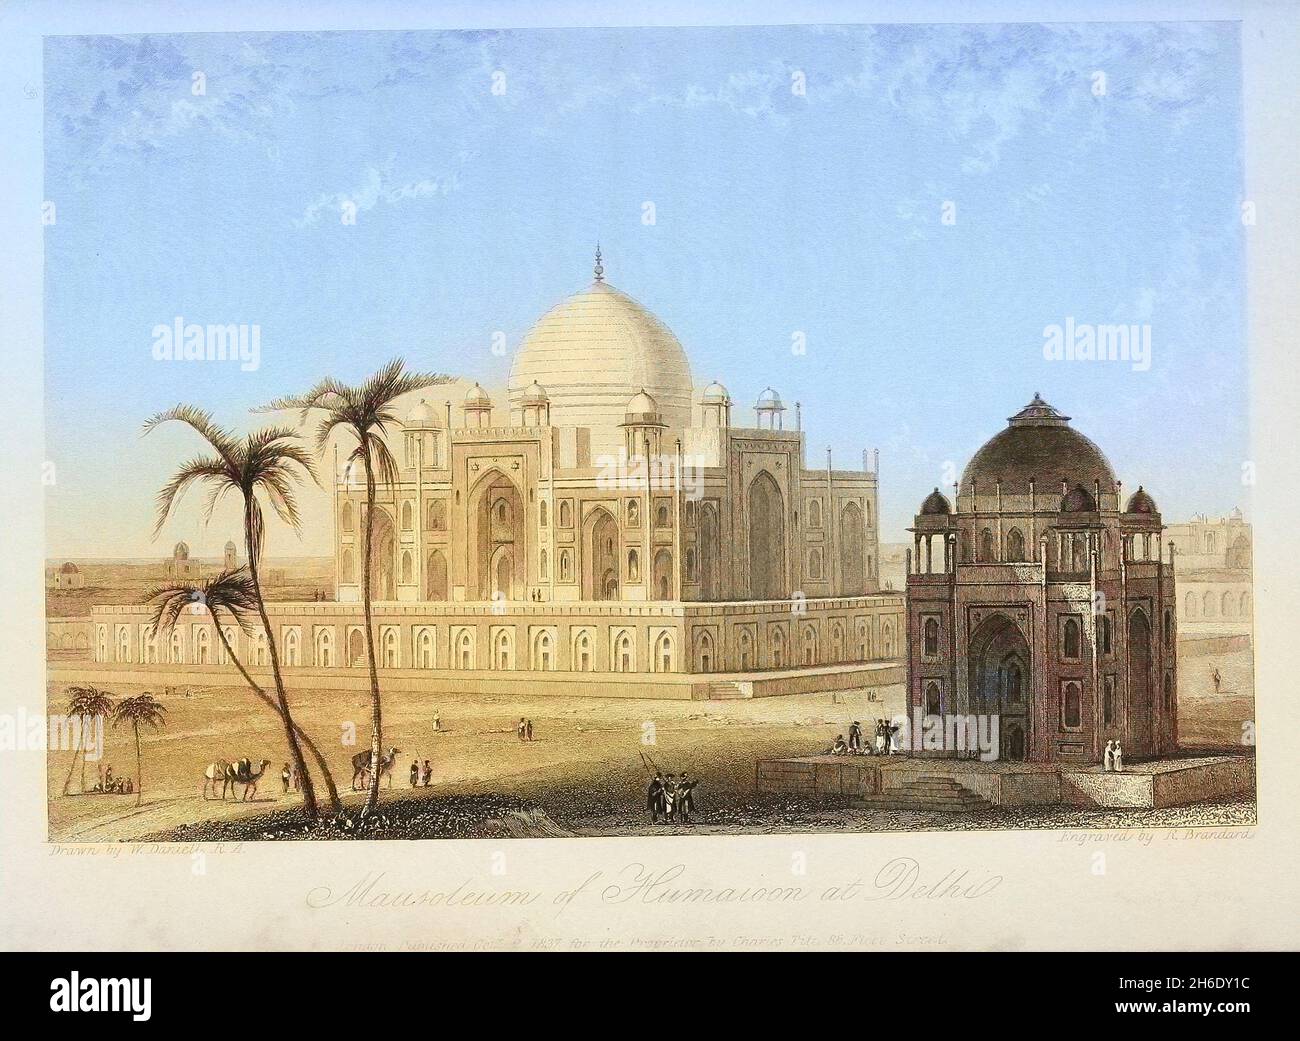 Machine colorised Mausoleum Of Humayoon [Humayun]  [Nasir-ud-Din Muḥammad (Persian: romanized: Nasīr-ad-Dīn Muhammad; 6 March 1508 – 27 January 1556), better known by his regnal name, Humayun (Persian: همایون, romanized: Humāyūn), was the second emperor of the Mughal Empire, who ruled over territory in what is now Afghanistan, Pakistan, Northern India, and Bangladesh from 1530 to 1540 and again from 1555 to 1556. Like his father, Babur, he lost his kingdom early but regained it with the aid of the Safavid dynasty of Persia, with additional territory. At the time of his death in 1556, the Mugh Stock Photo